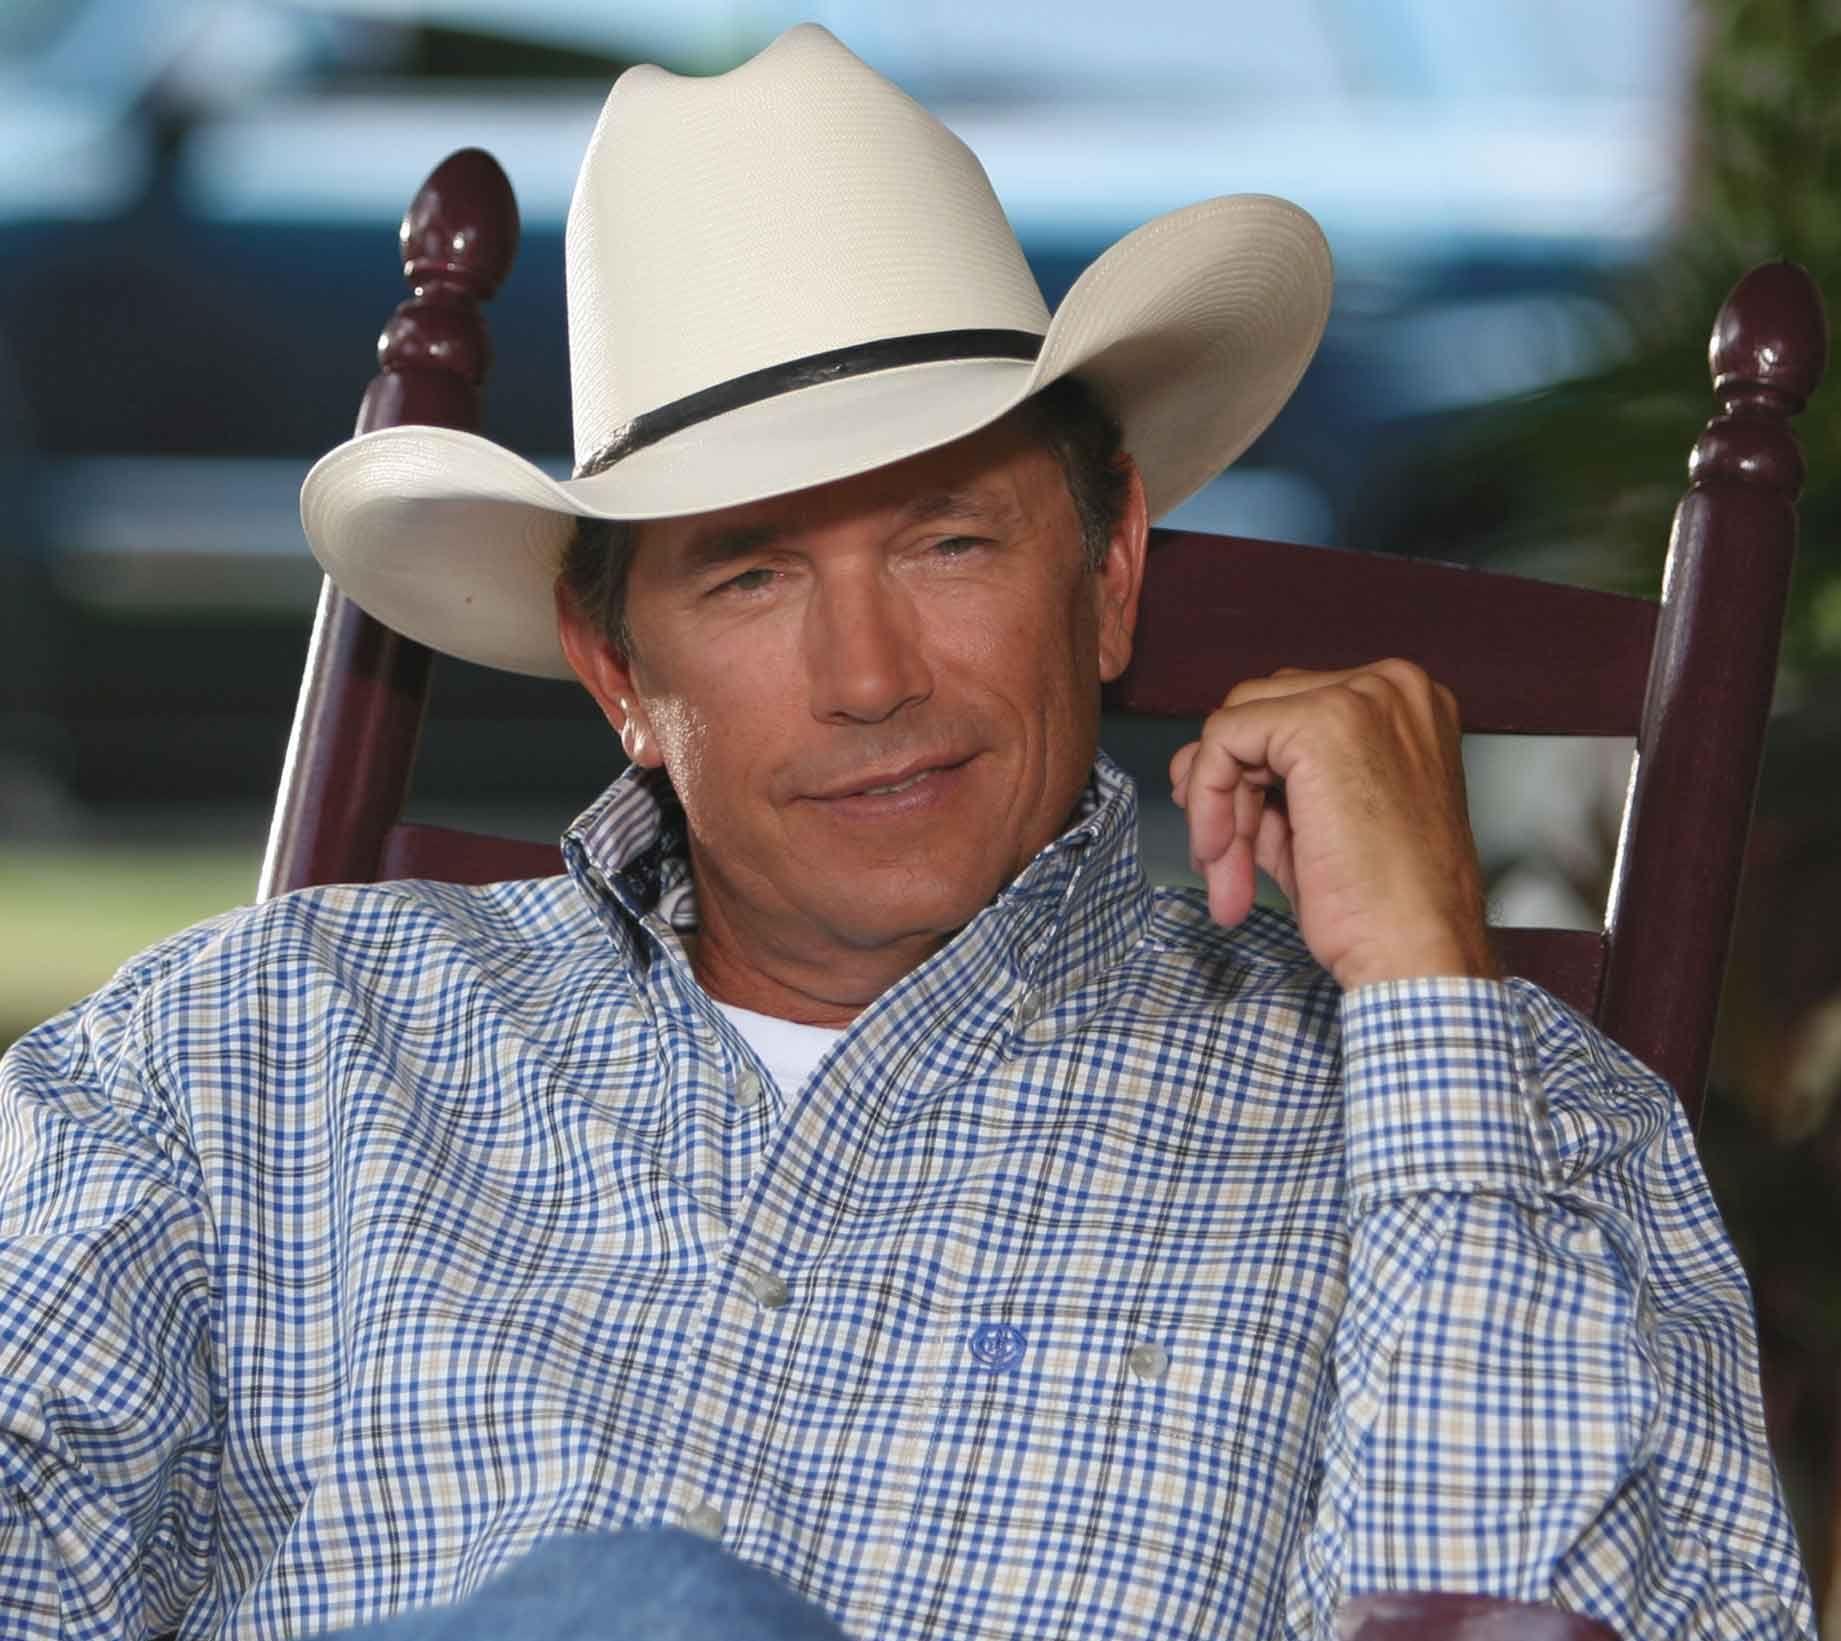 Download The Latest George Strait HD Wallpaper From Wallpaper111